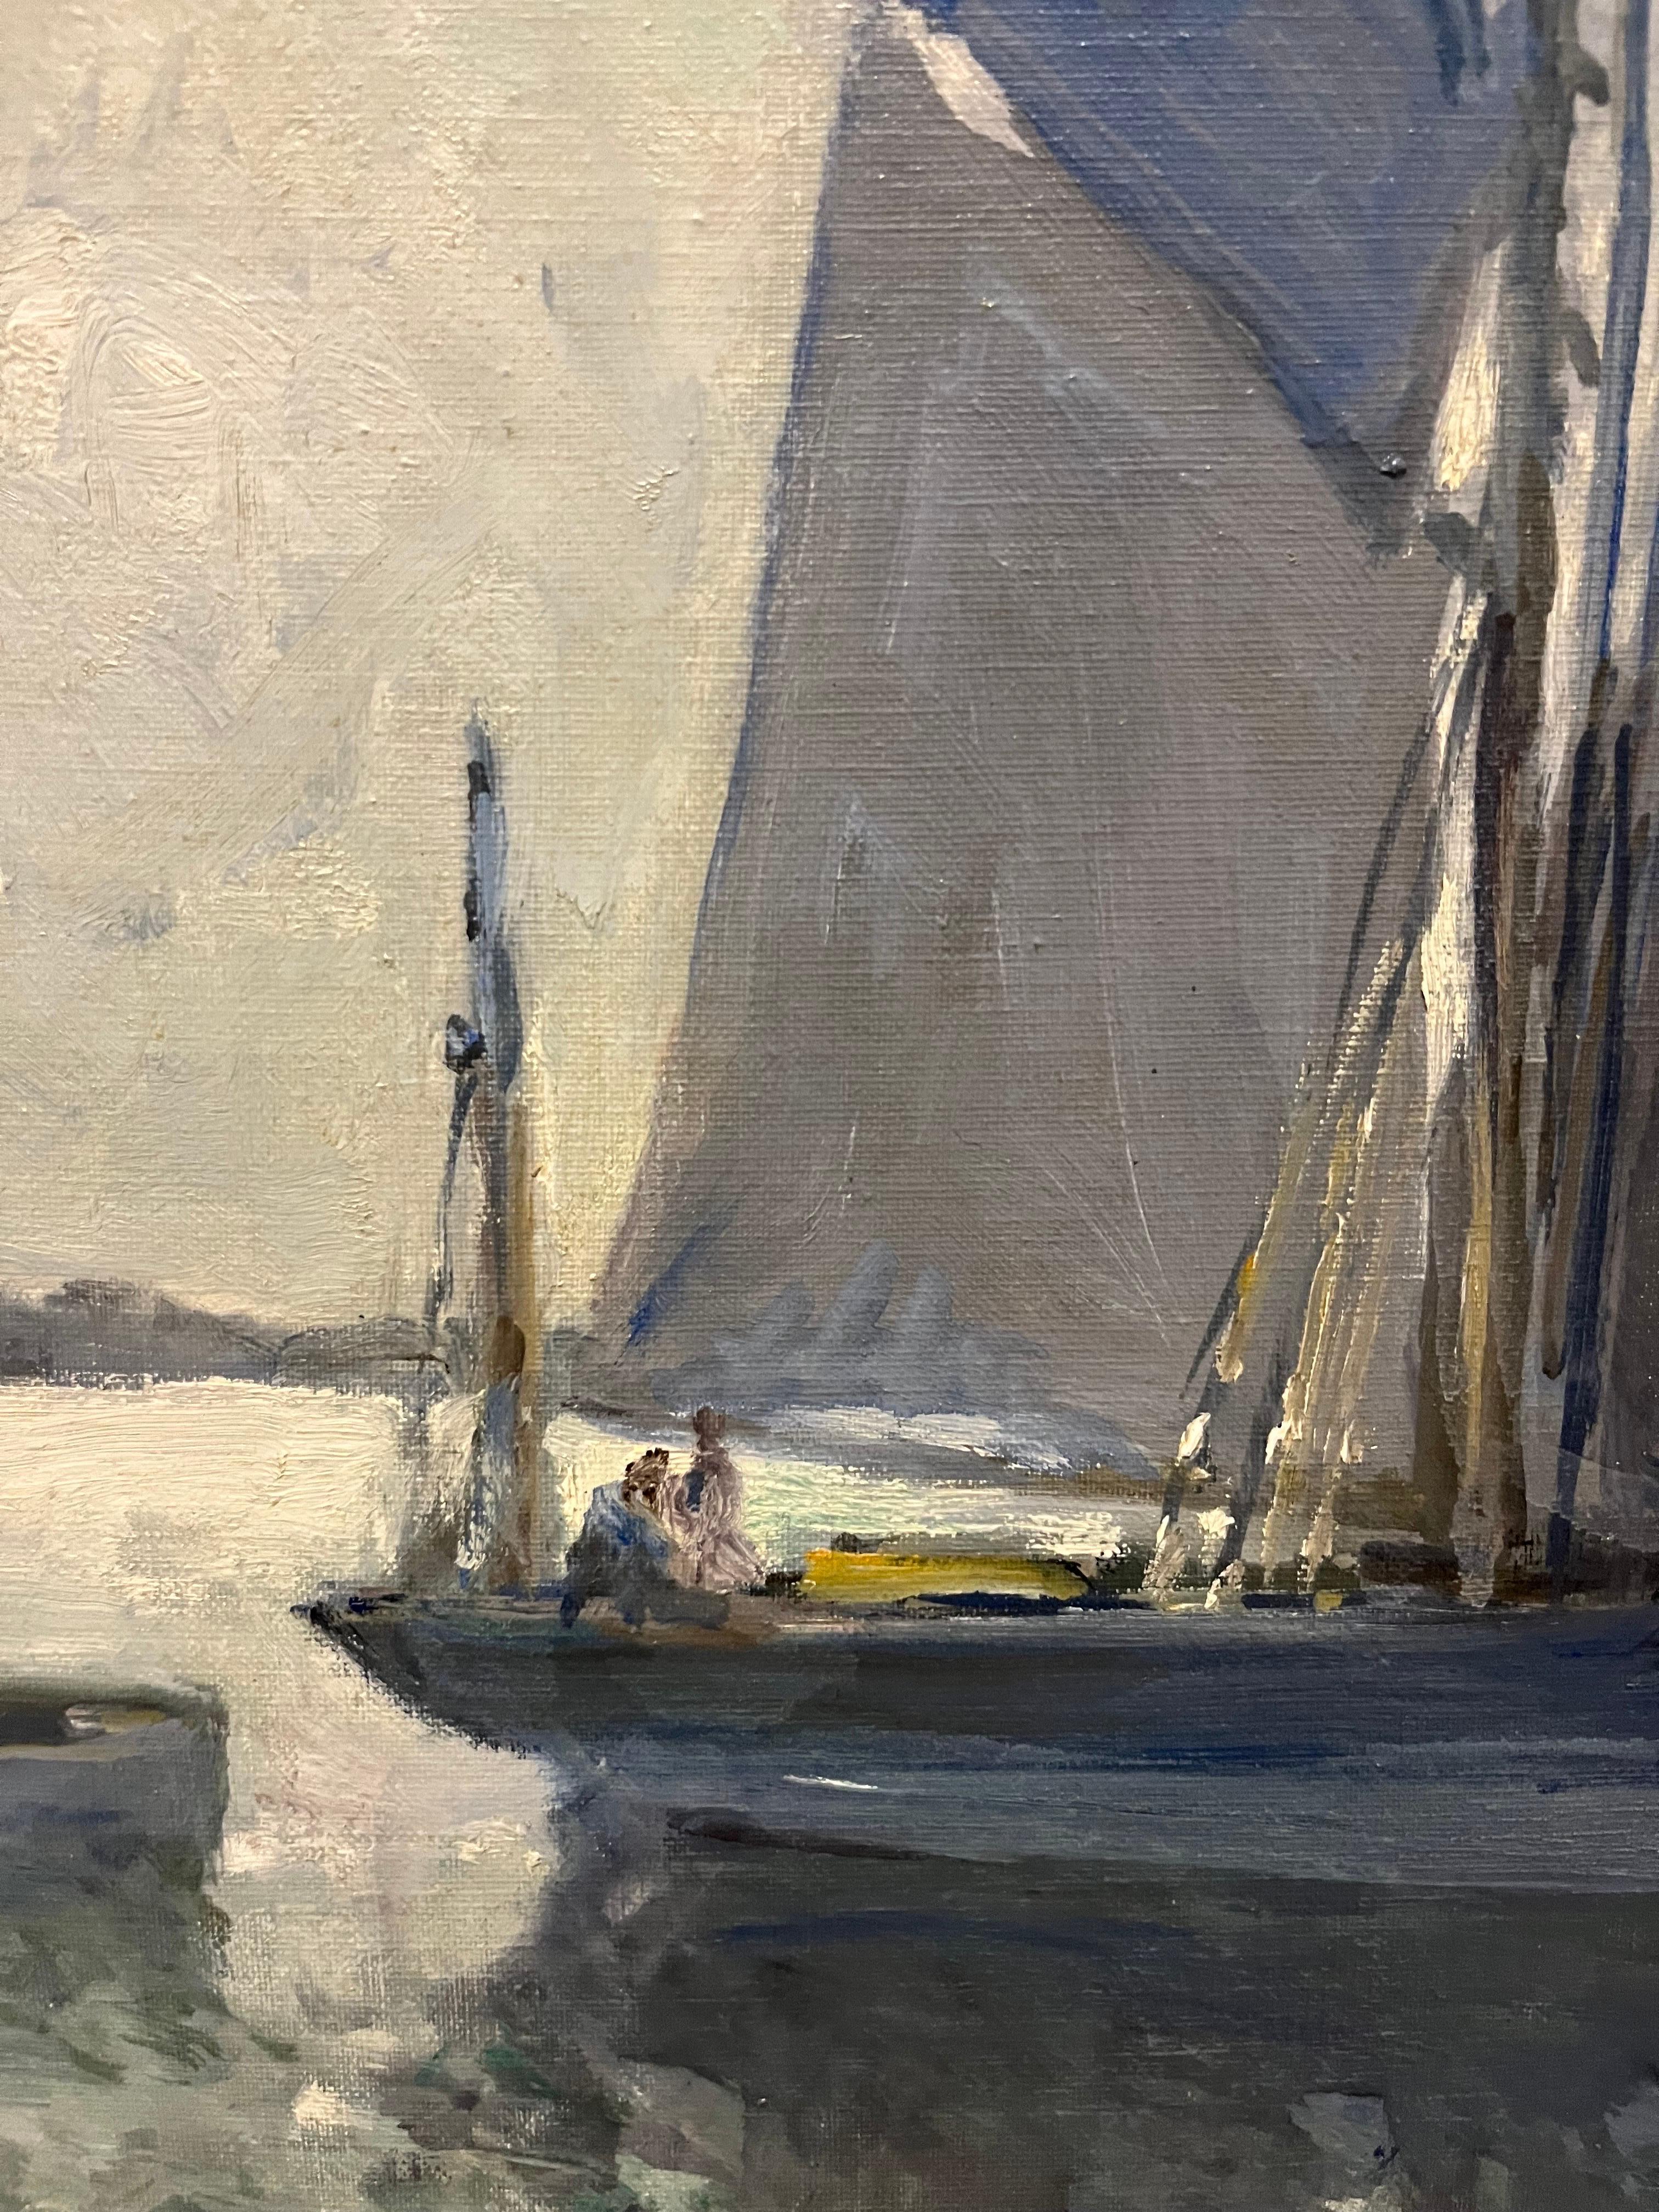 Sailboats, Ocean, France , grey, blue, azure,landscape France
Henry Maurice CAHOURS (Paris, 1889 –  Vence, 1974)

He was born in Paris but spent his childhood and adolescence in Amiens, where he attended the Academy of Fine Arts. He moved to Paris,